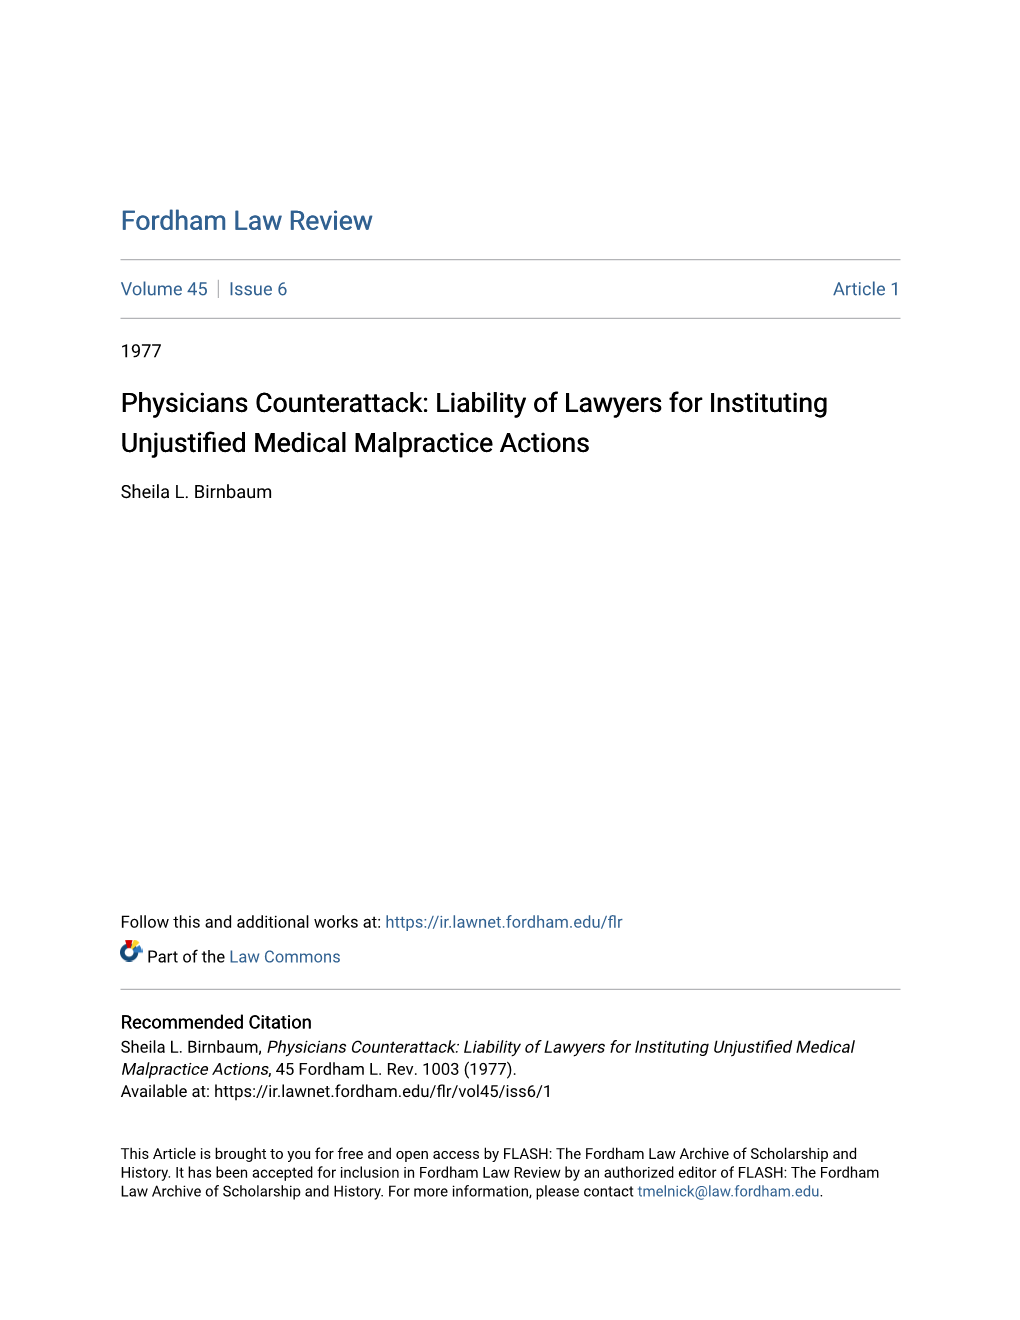 Liability of Lawyers for Instituting Unjustified Medical Malpractice Actions